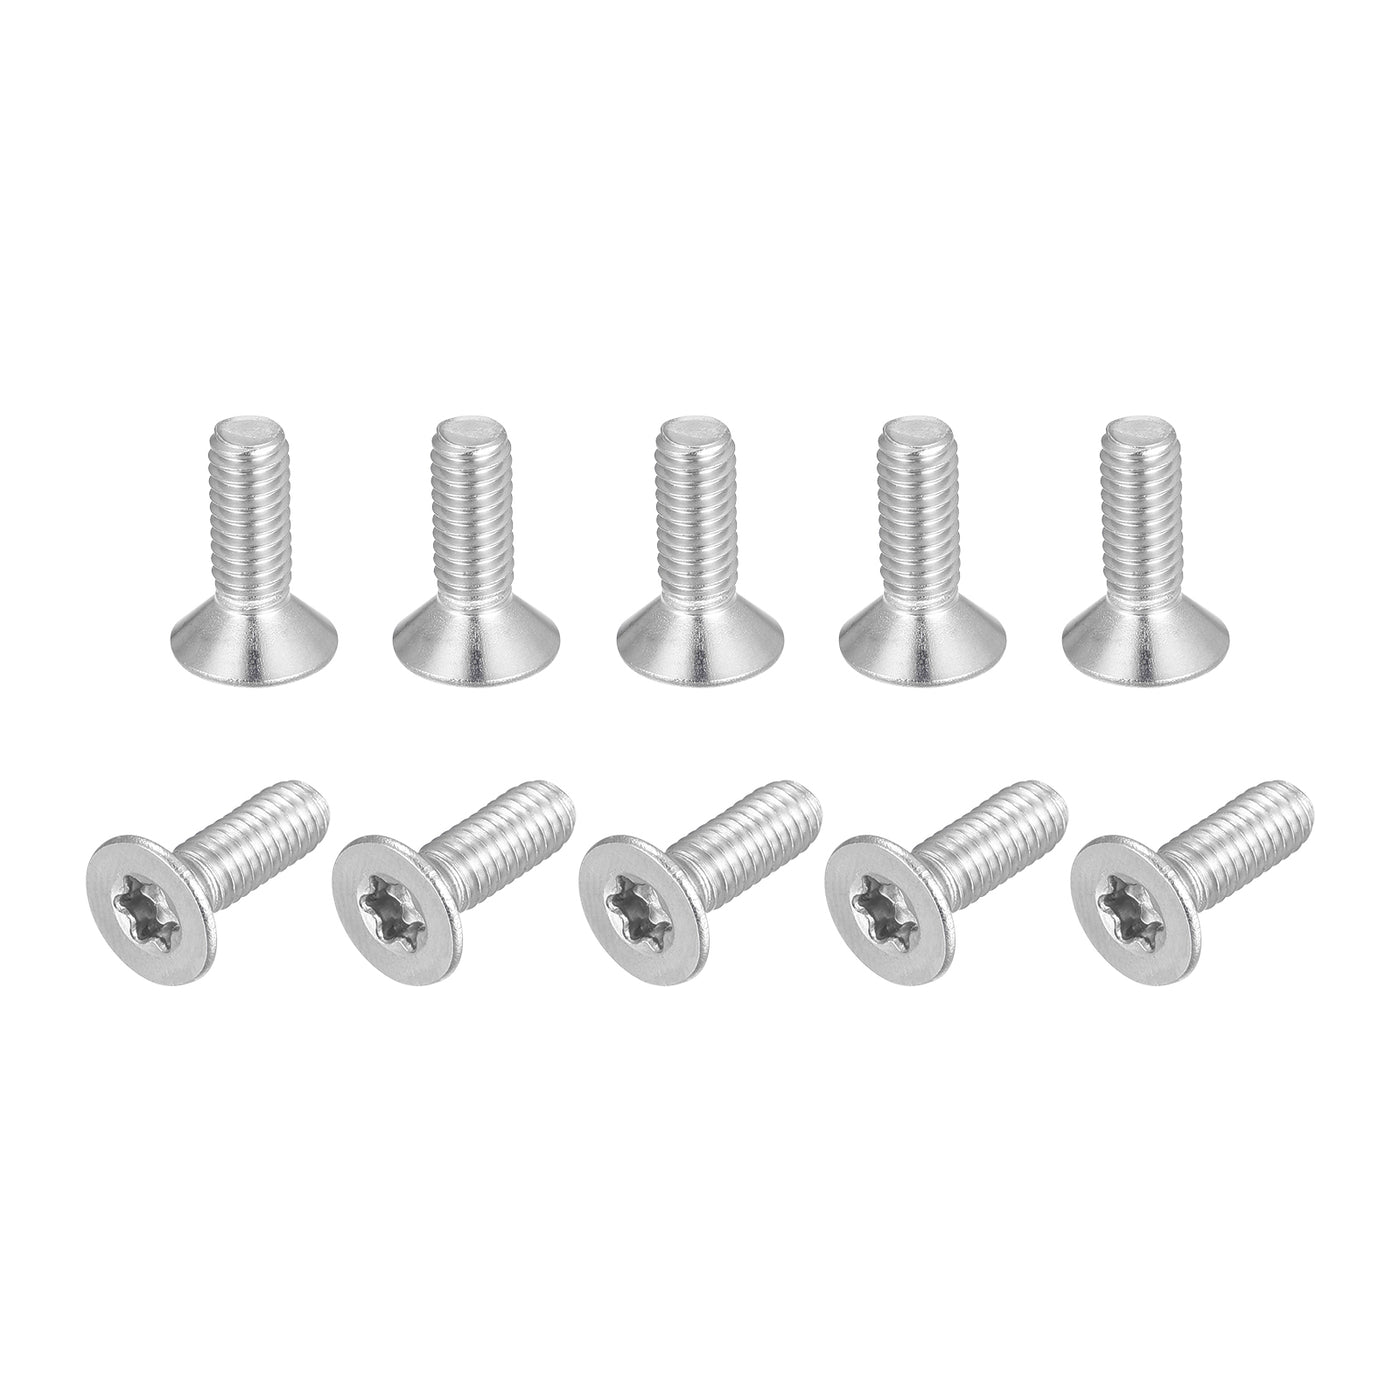 uxcell Uxcell M4x12mm Torx Security Screws, 10pcs 316 Stainless Steel Countersunk Head Screw